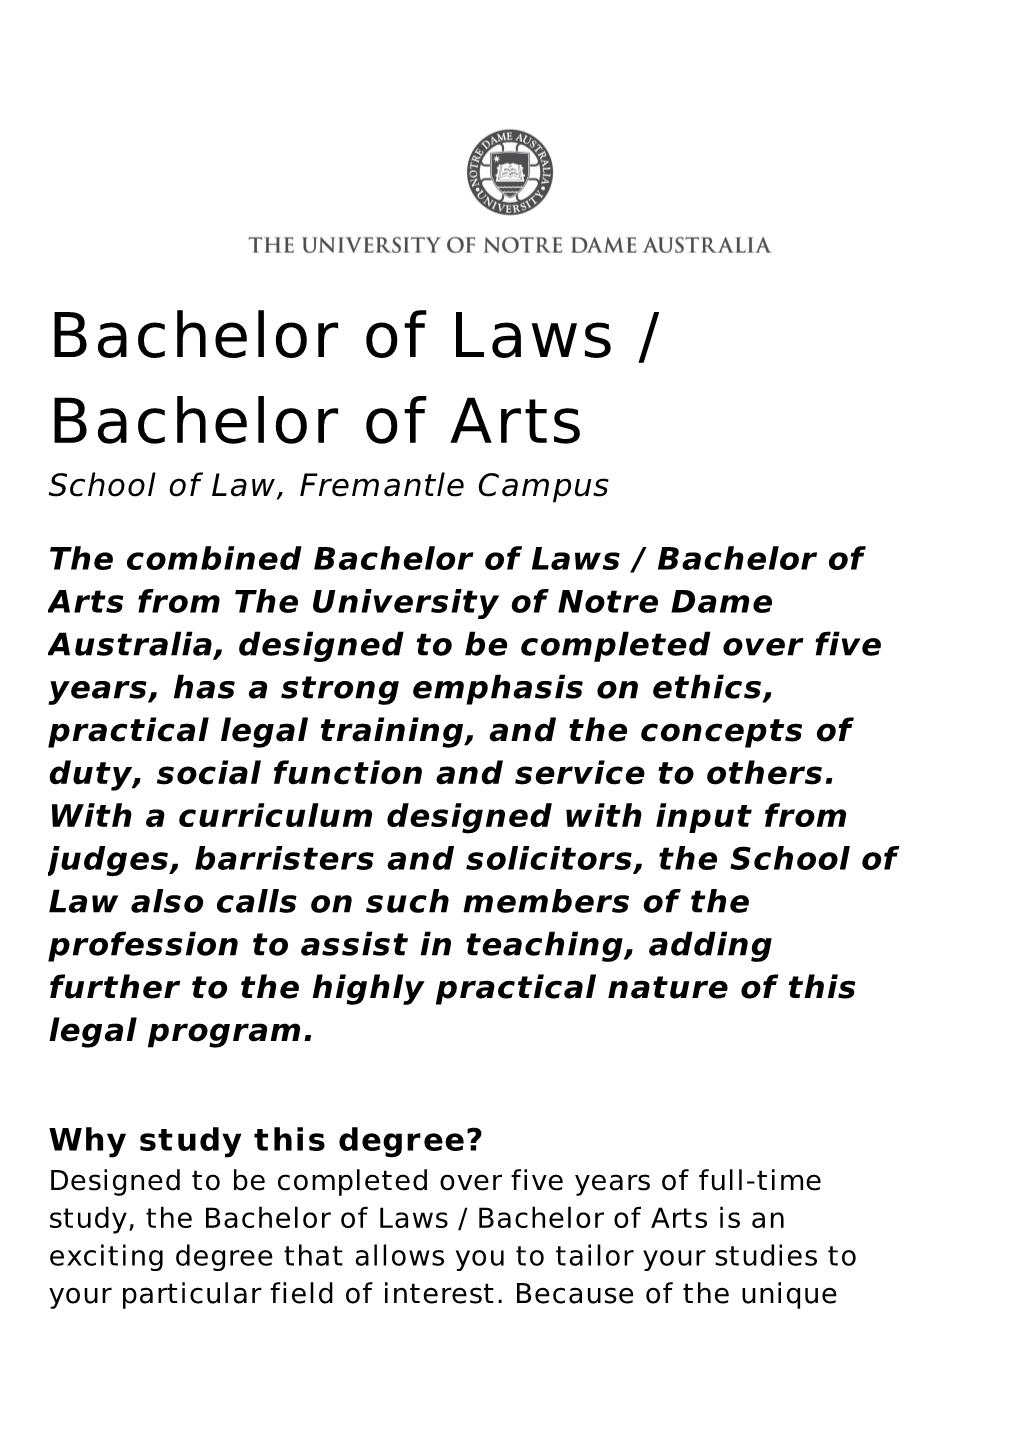 Bachelor of Laws / Bachelor of Arts School of Law, Fremantle Campus